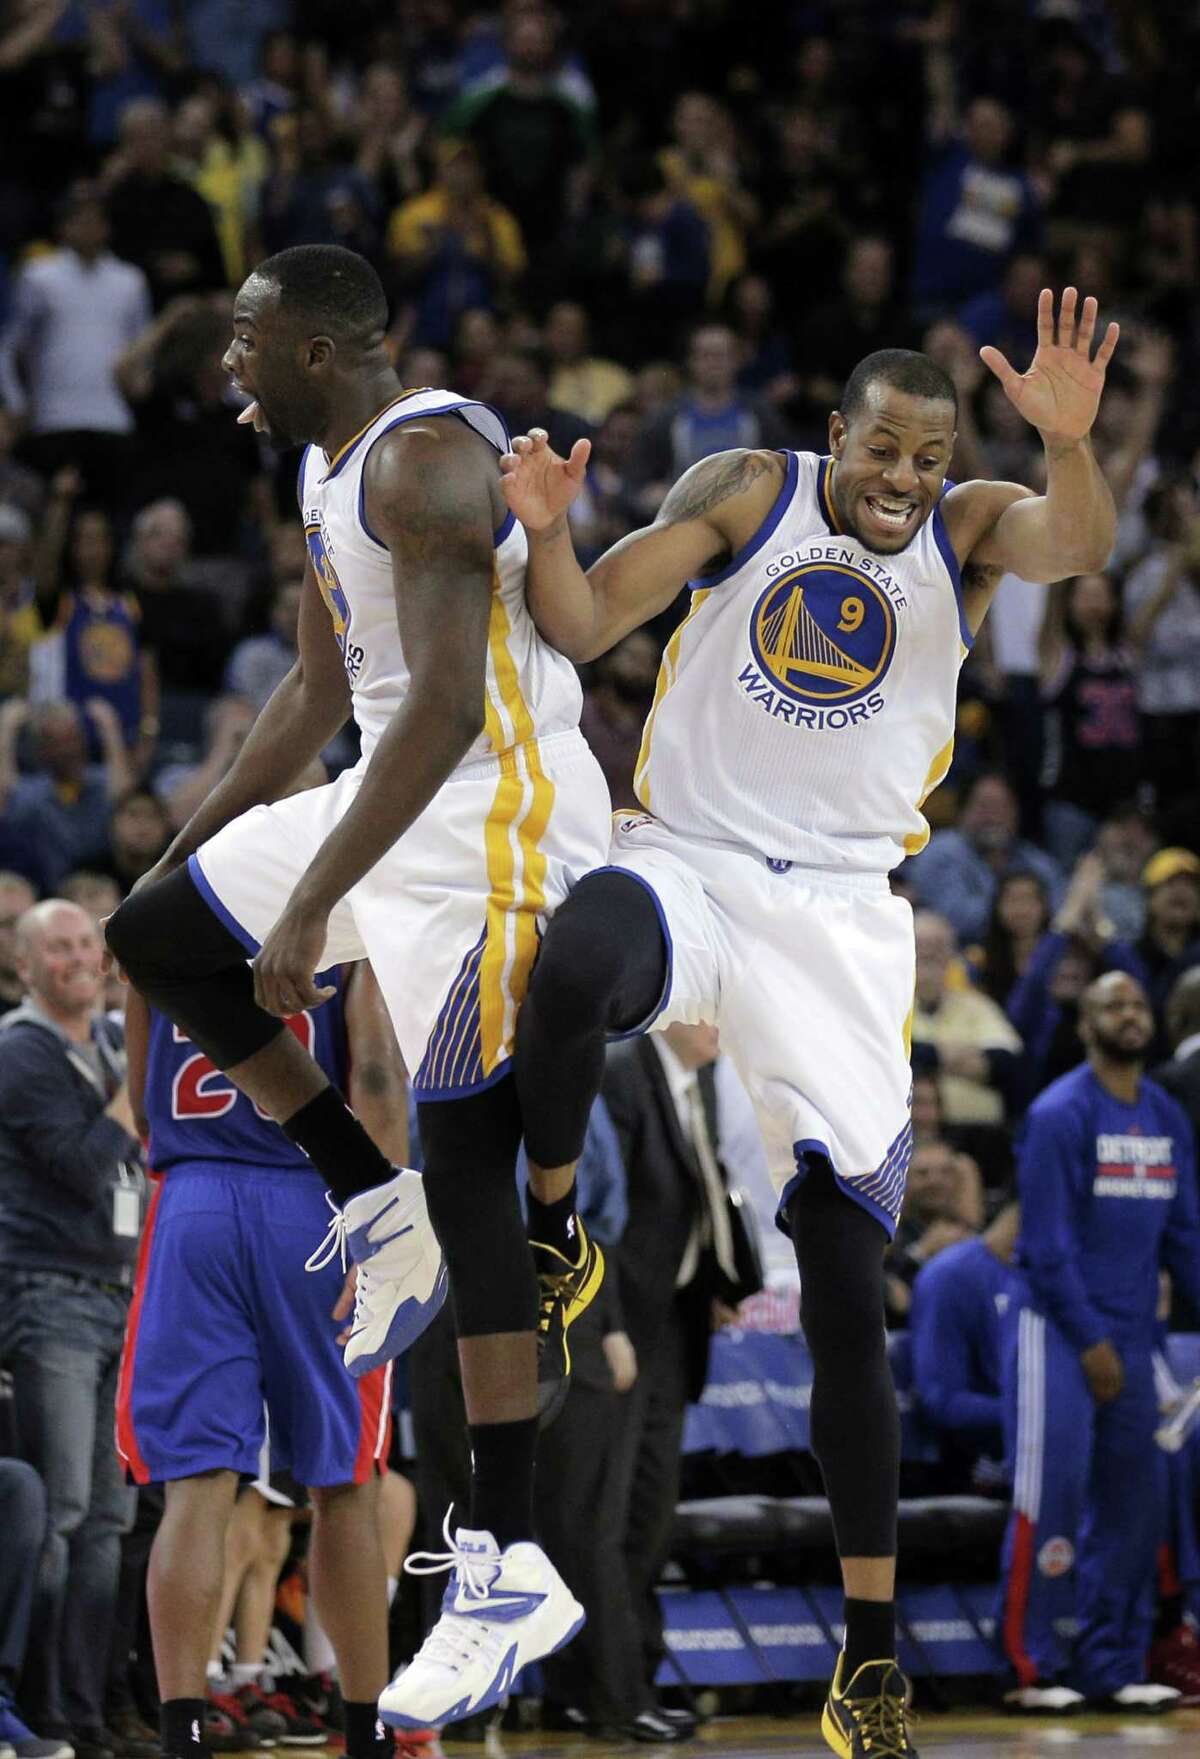 Andre Iguodala (9) and Draymond Green (23) celebrate Iguodala's fourth quarter dunk. The Golden State Warriors played the Detroit Pistons at Oracle Arena in Oakland, Calif., on Wednesday, March 11, 2015.